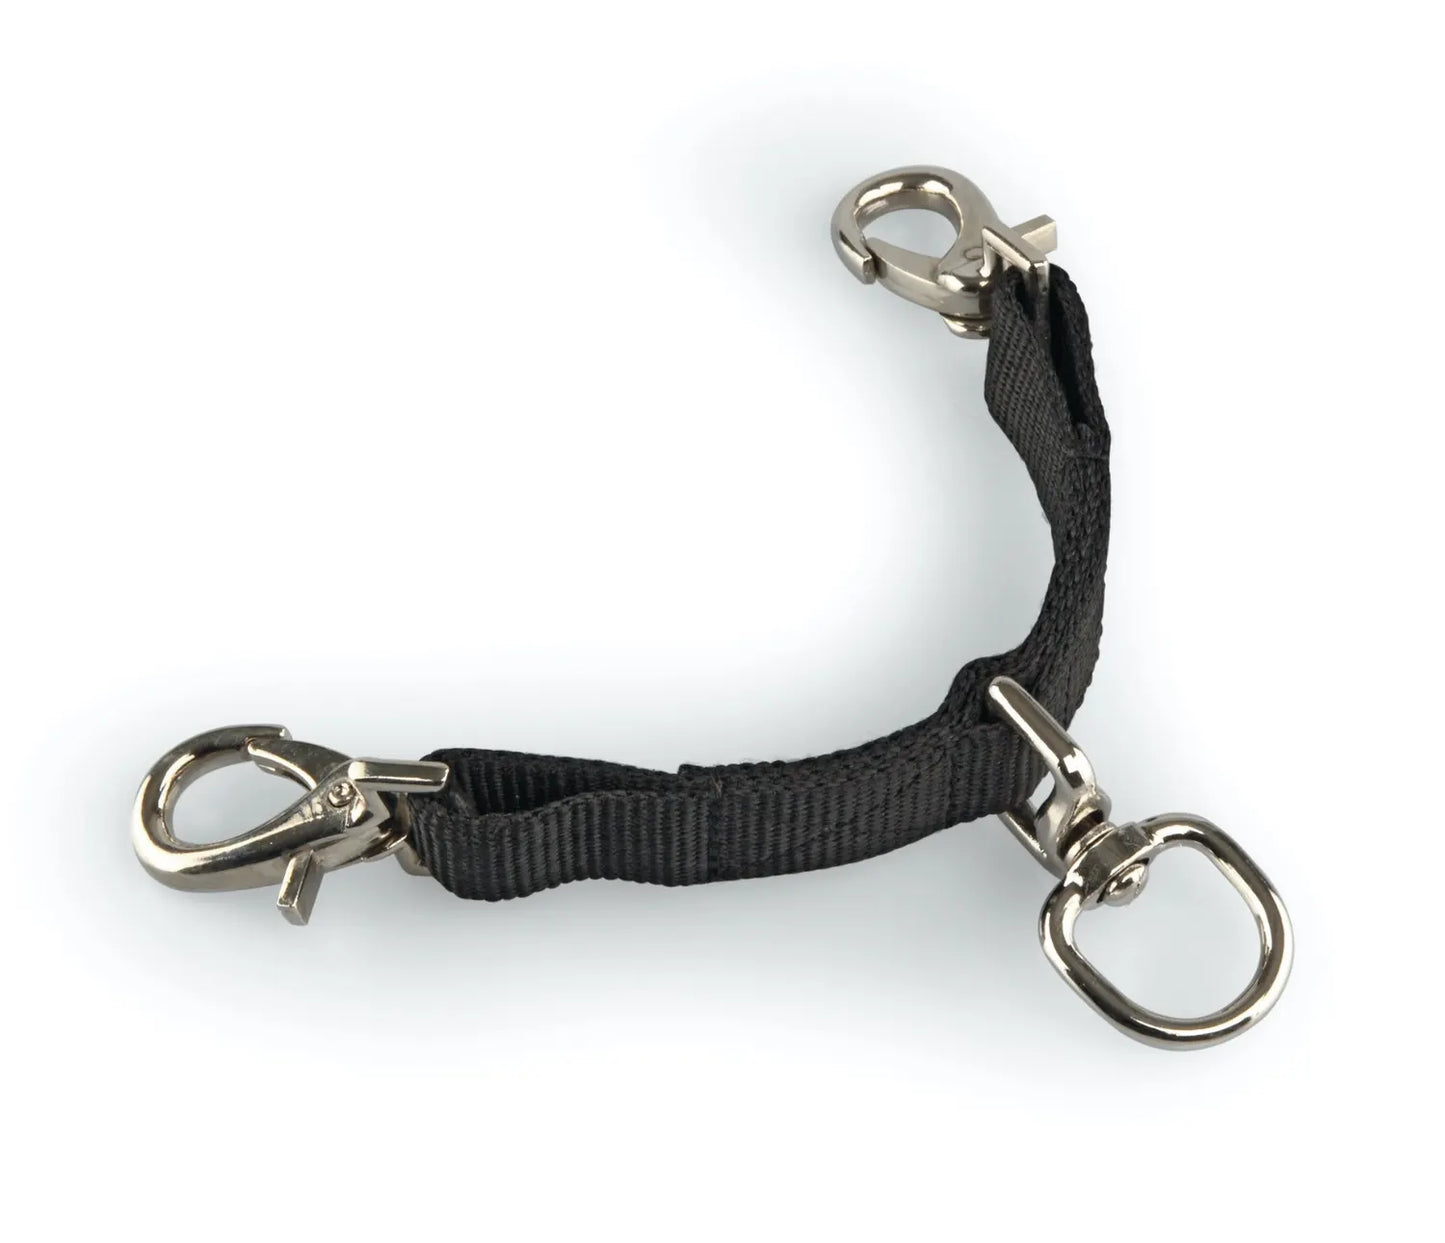 Shires Newmarket lunge/lead attachment